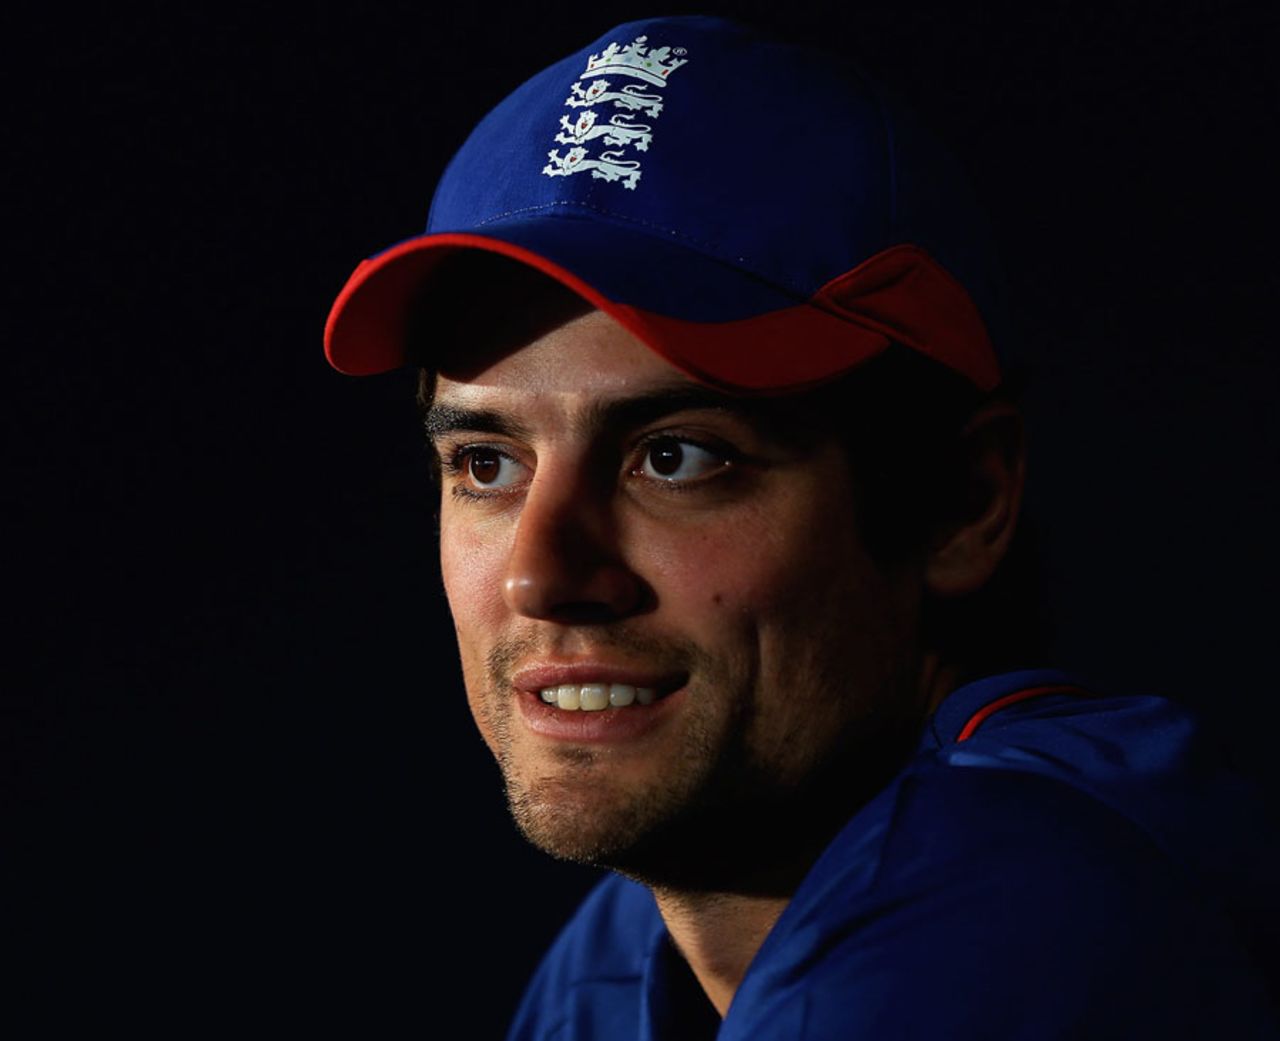 Alastair Cook chats with the media, Birmingham, June 7, 2013